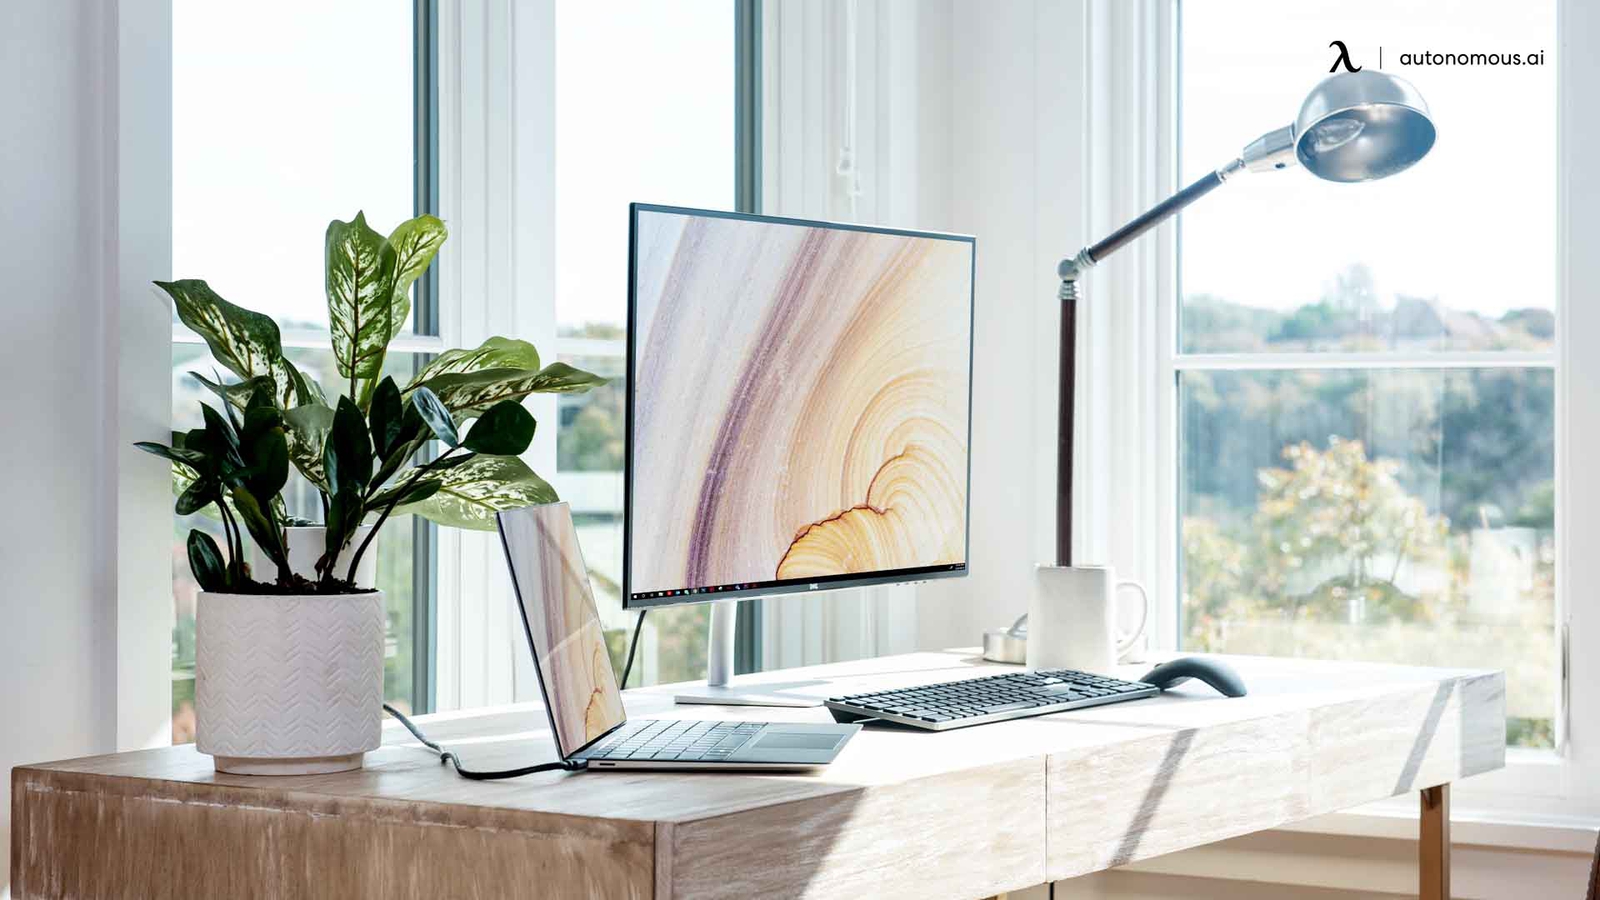 7 Tips to Make a Small Home Office Feel Bigger